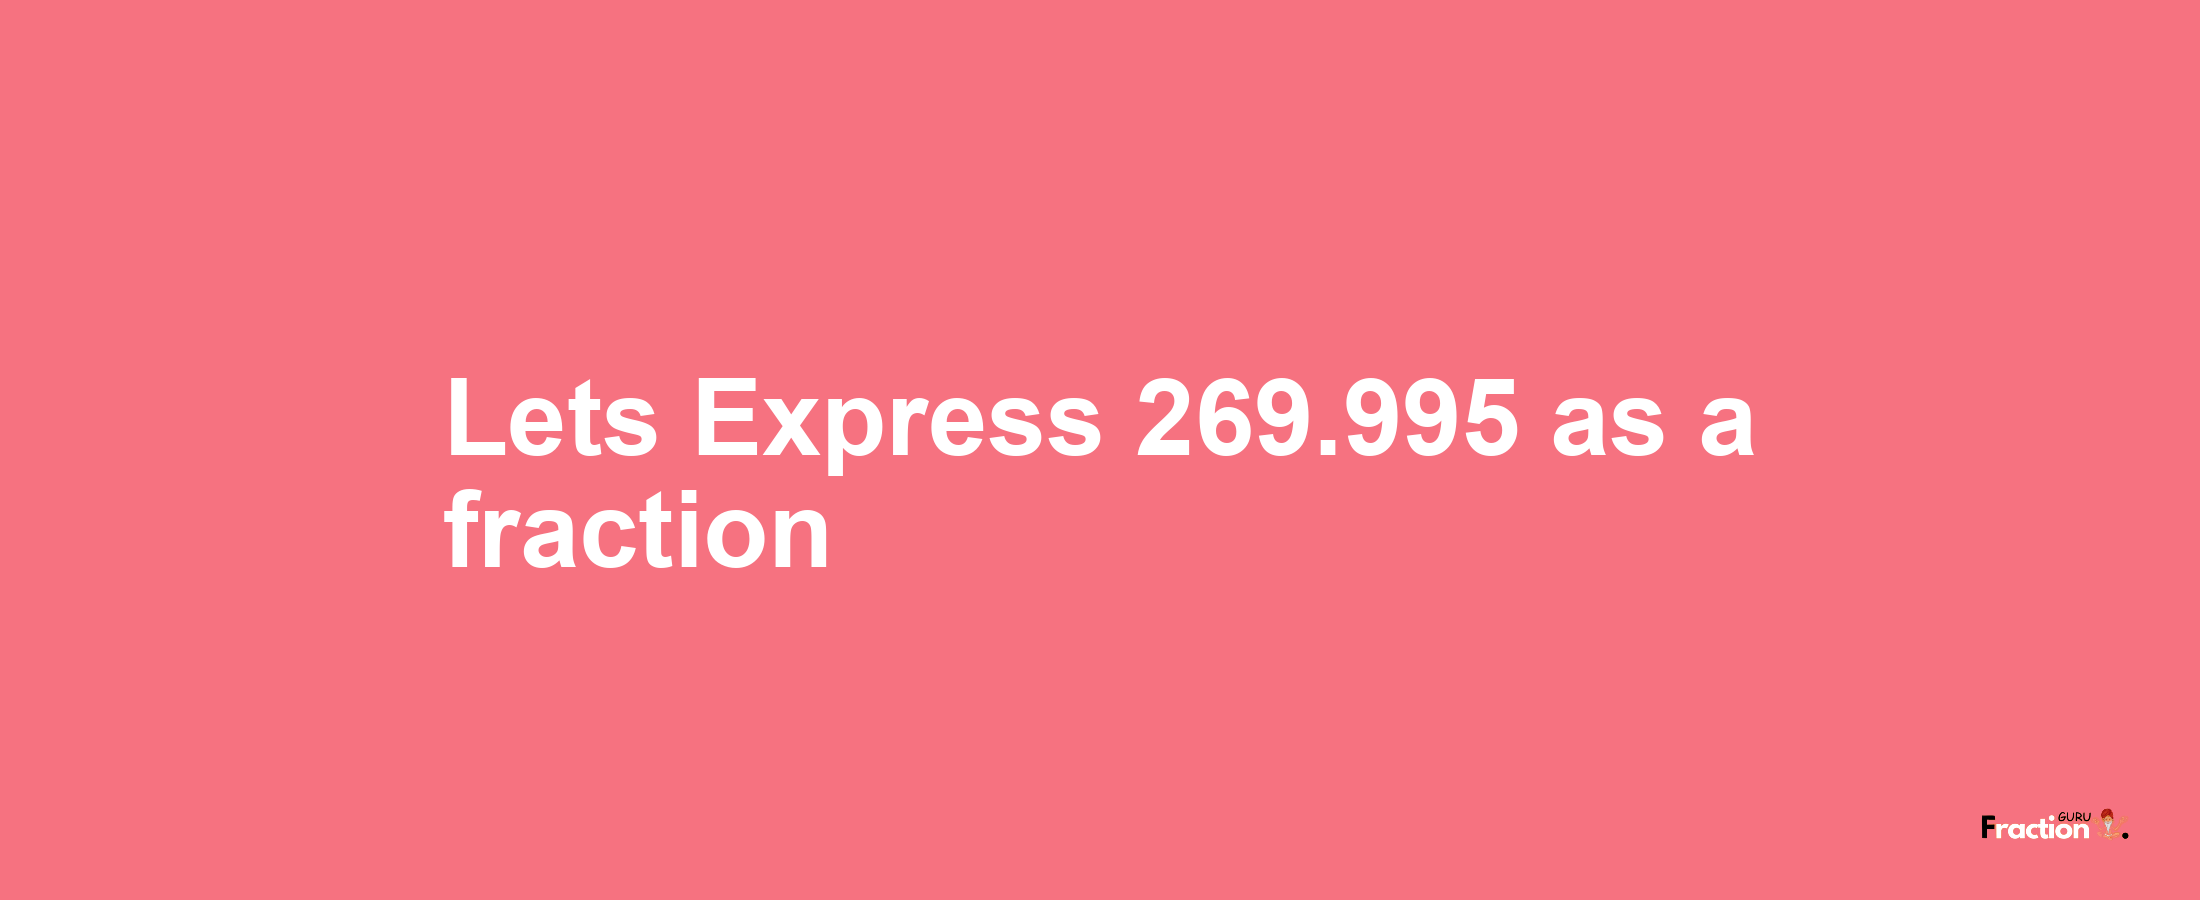 Lets Express 269.995 as afraction